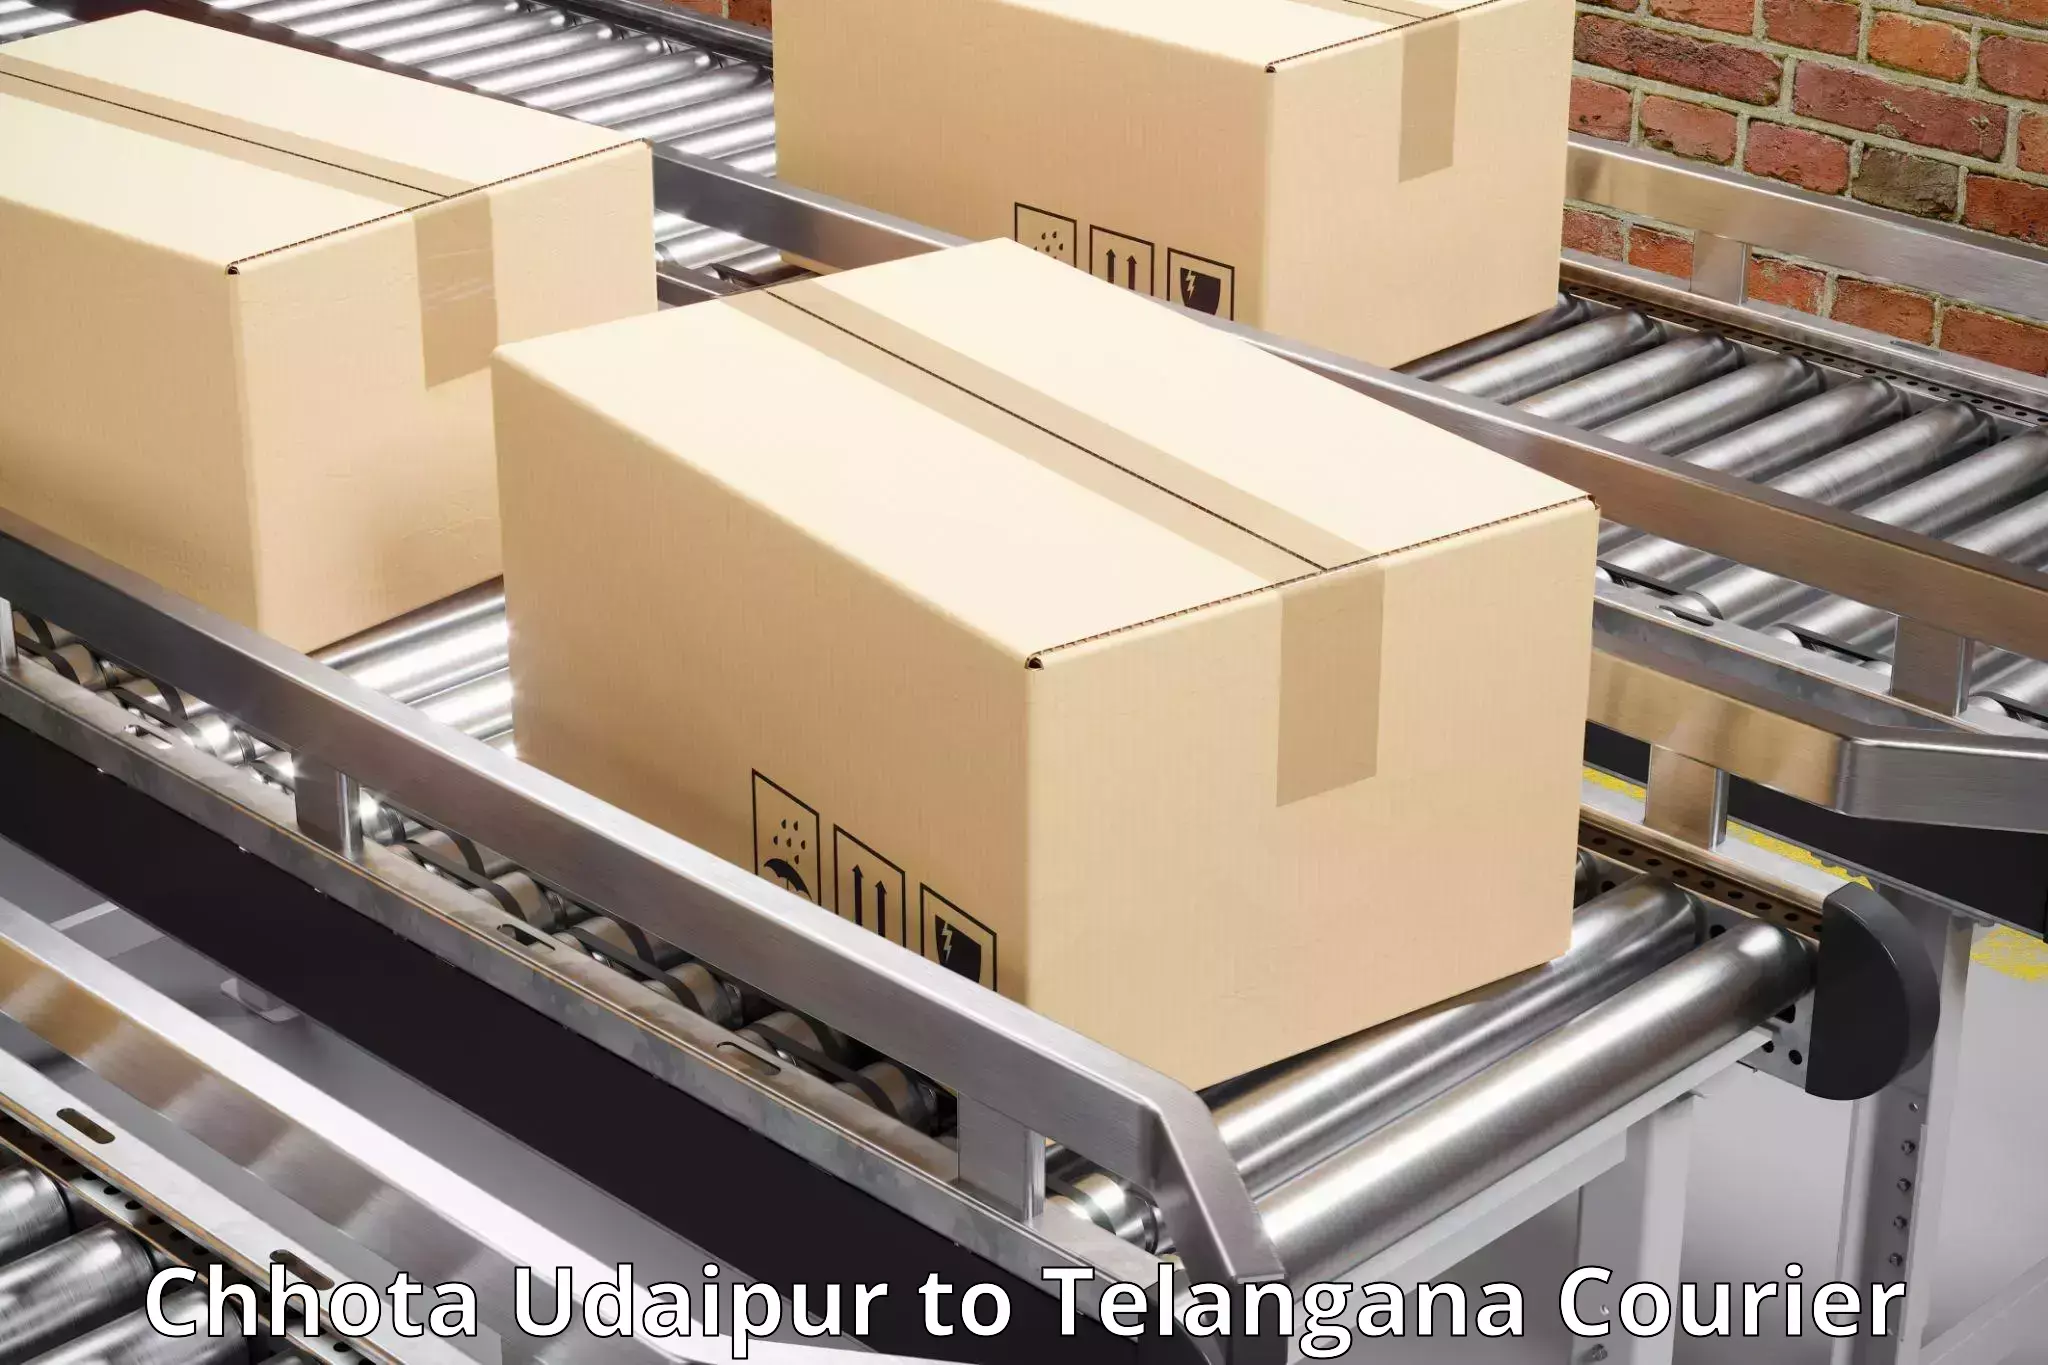 State-of-the-art courier technology Chhota Udaipur to Padmajiwadi